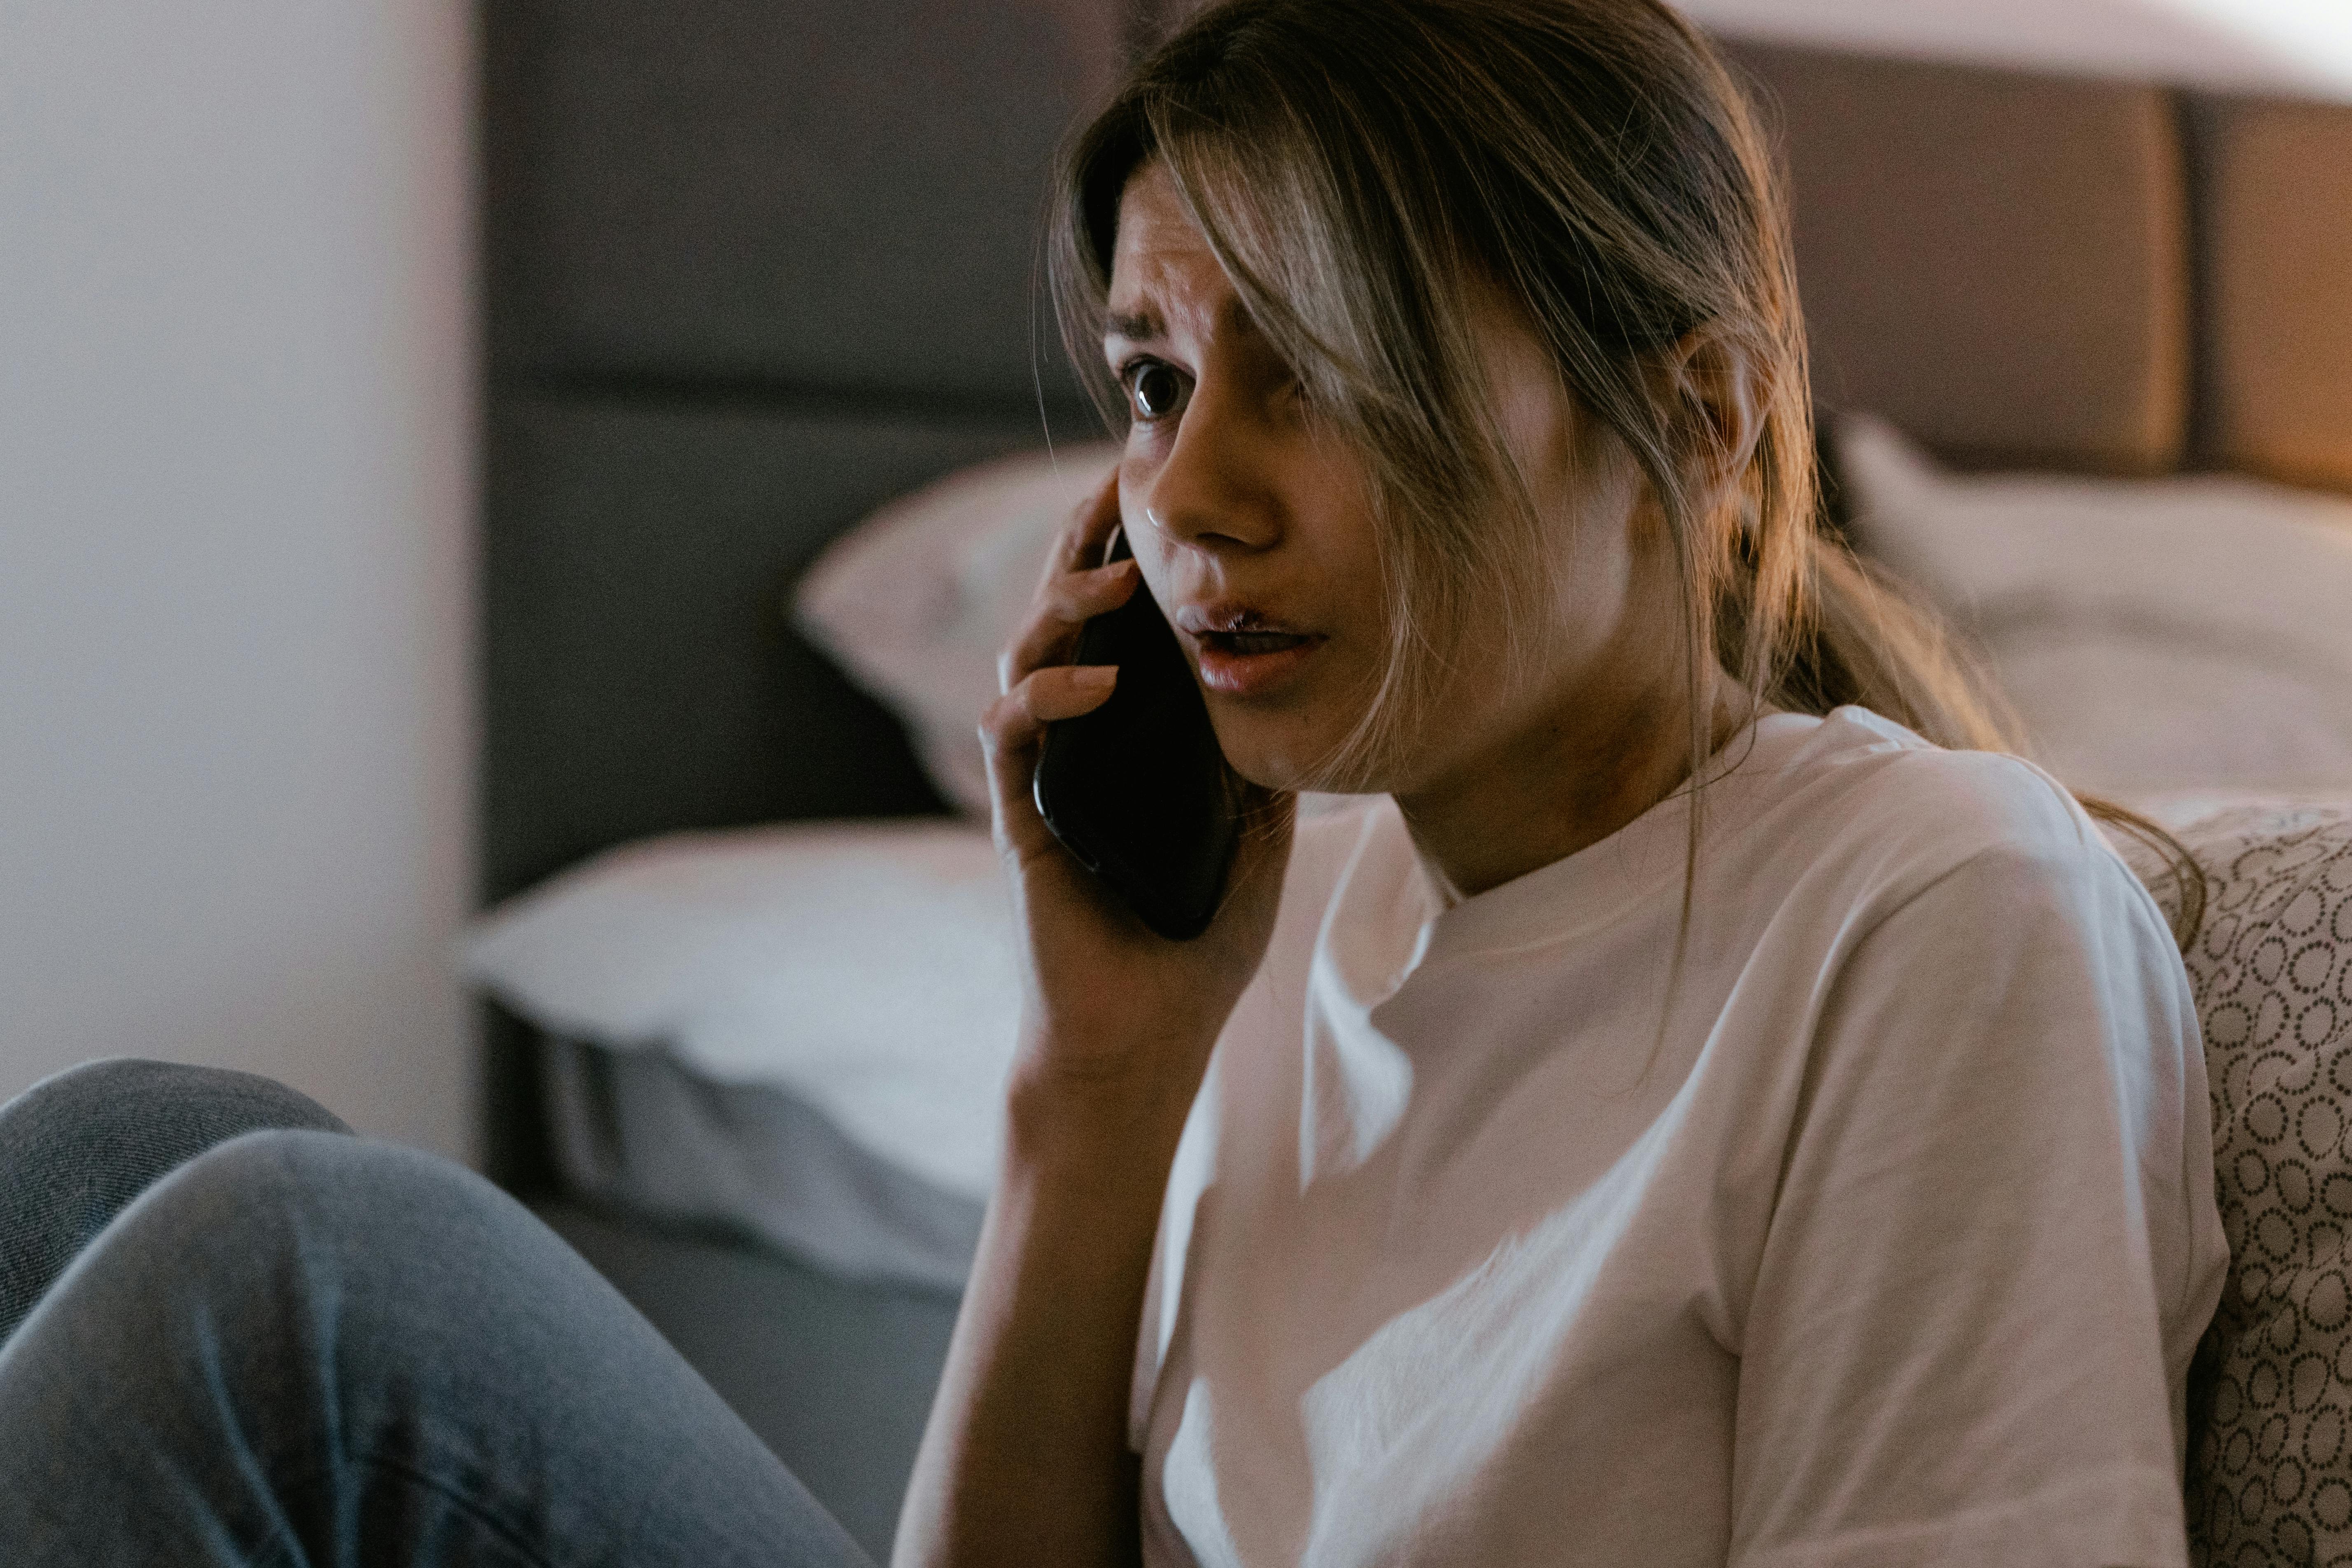 A woman calling on her phone | Source: Pexels